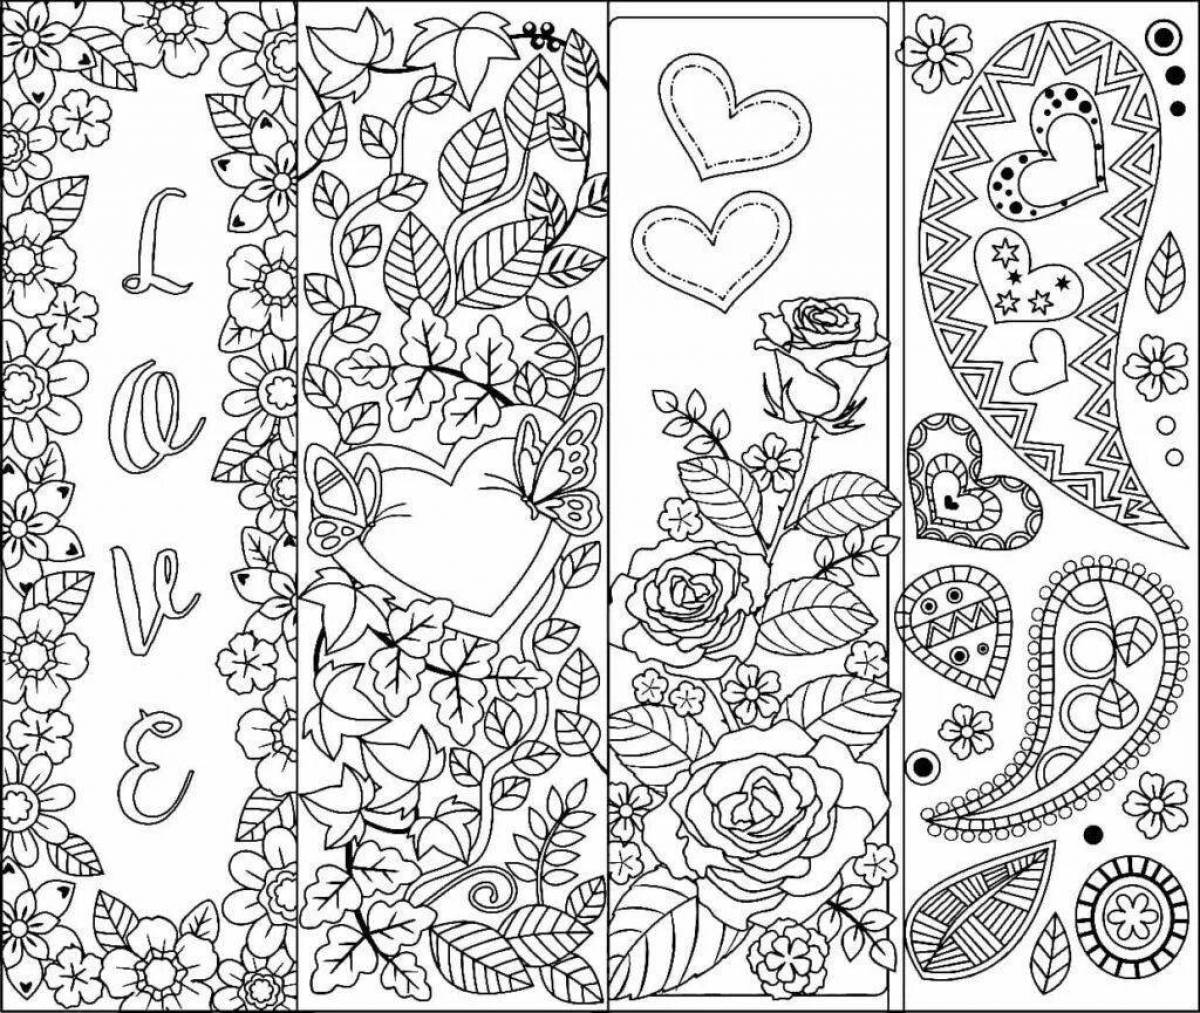 Relaxing coloring book when bored